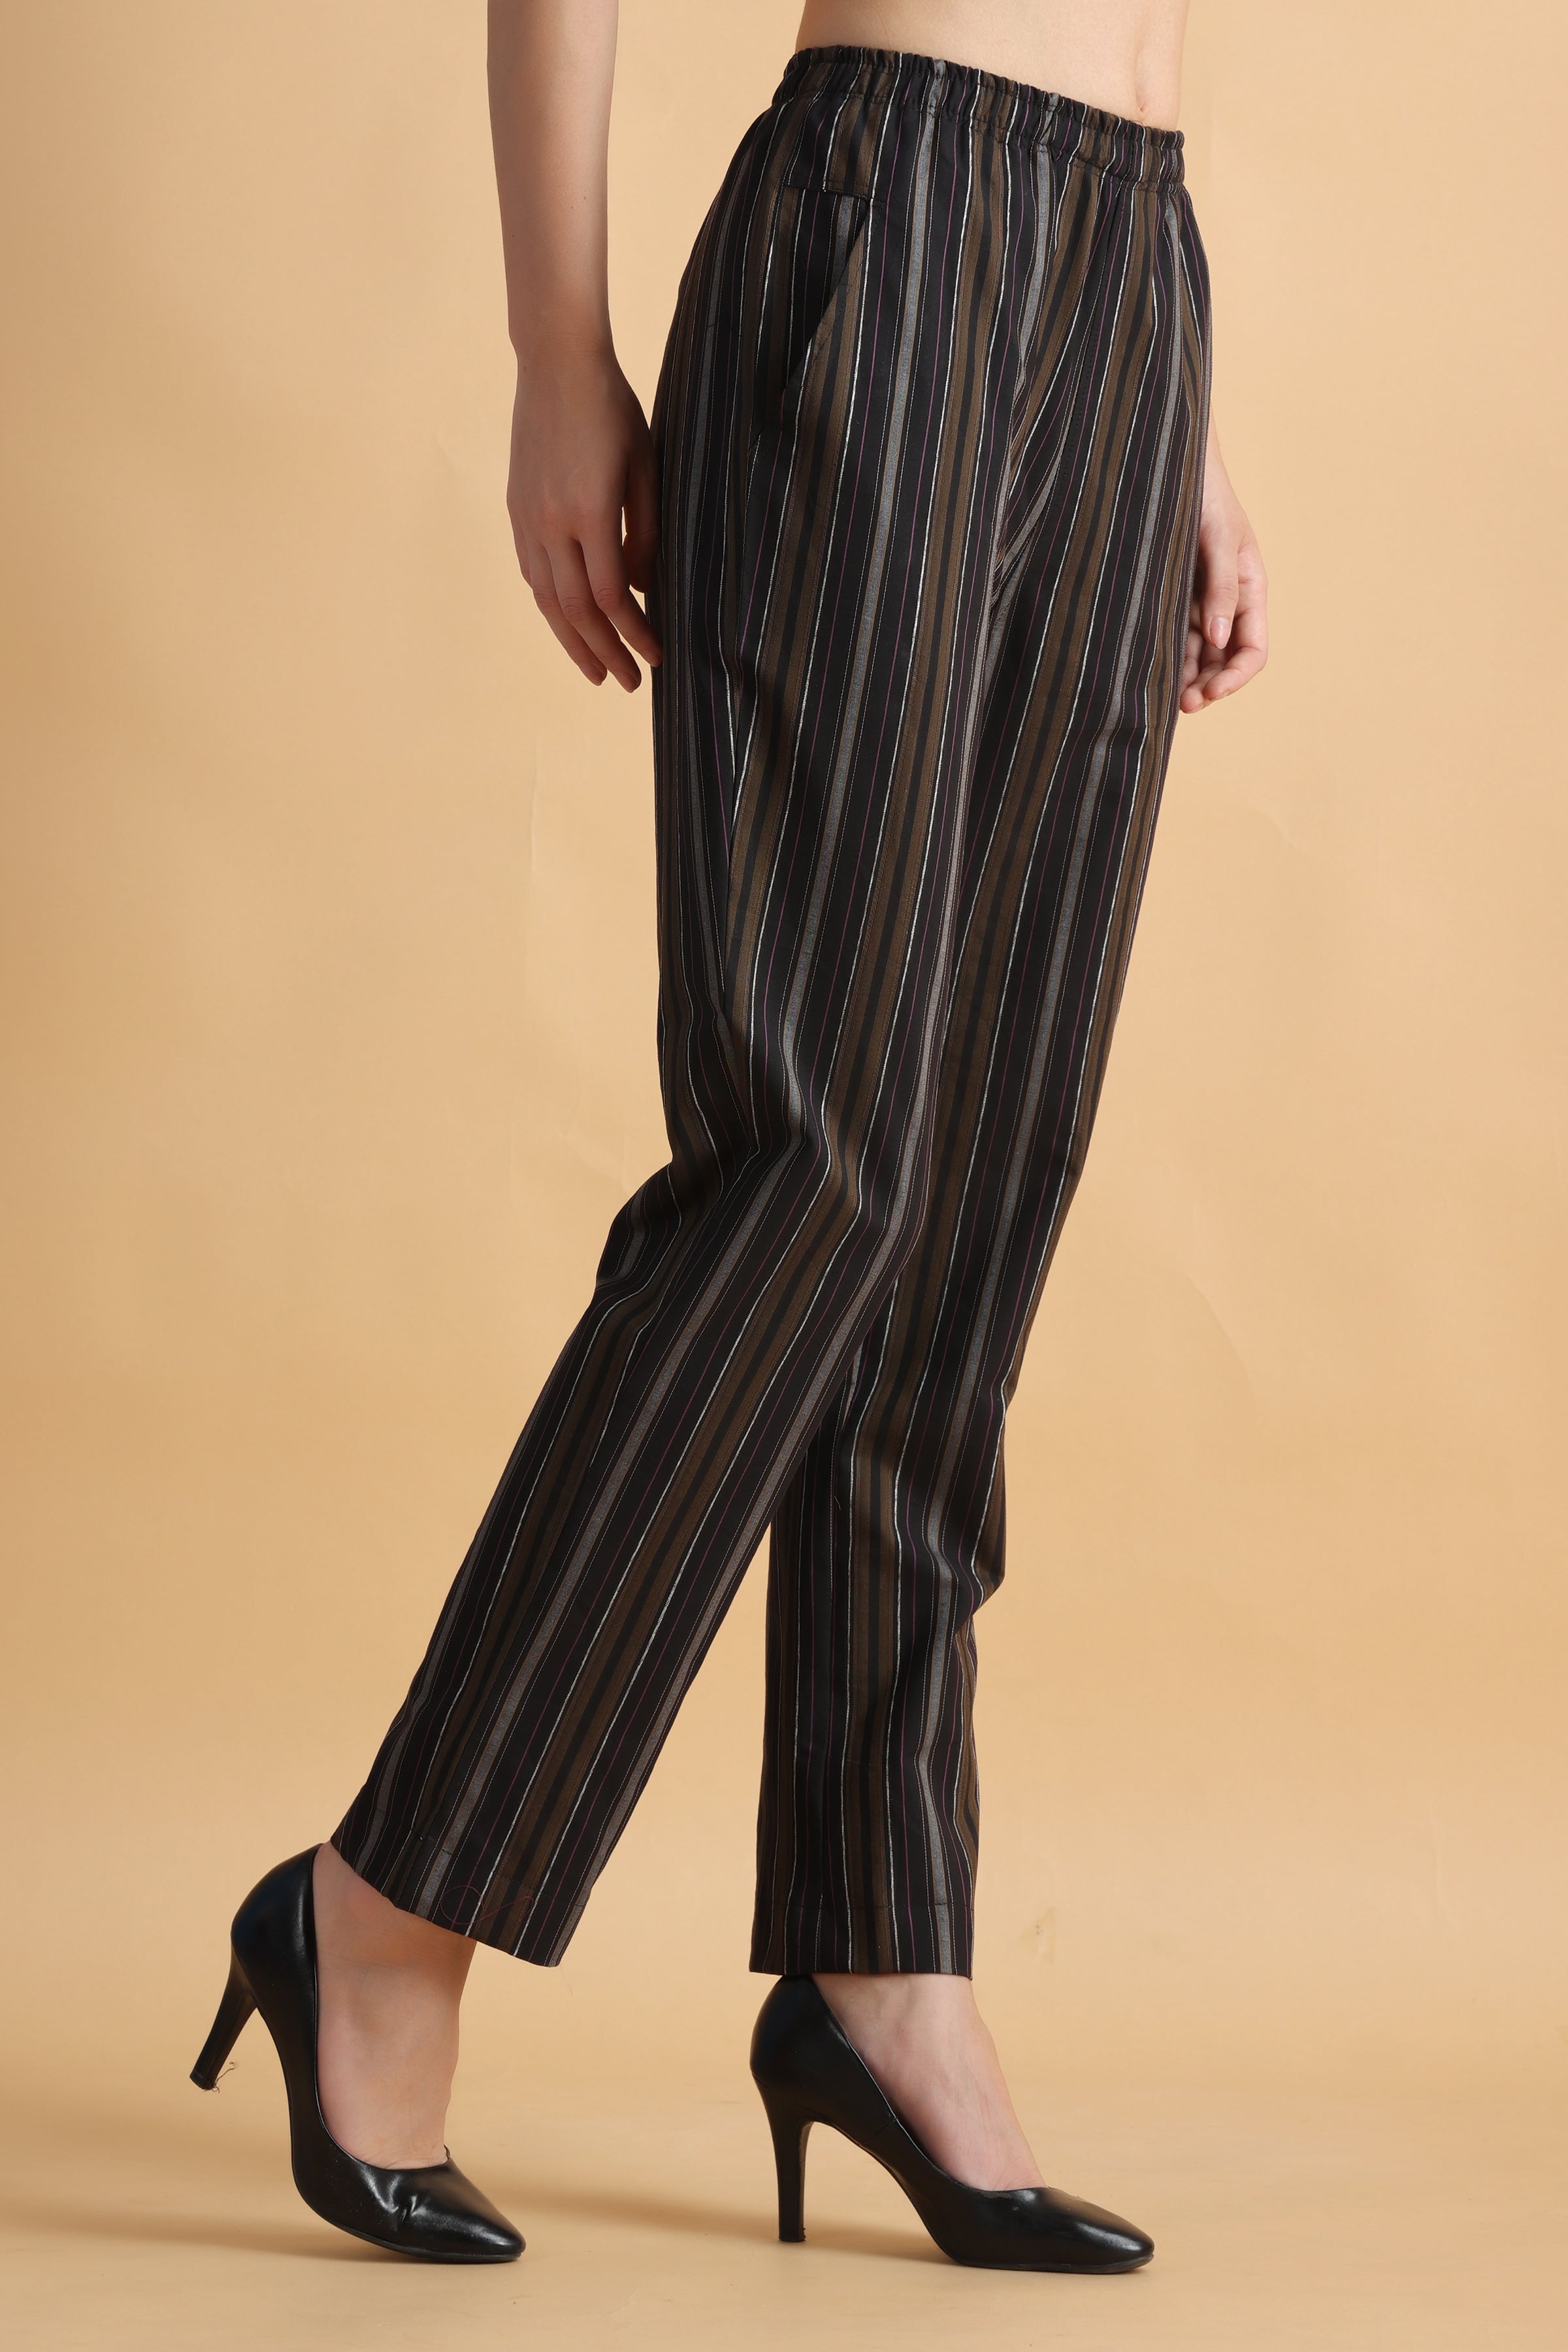 Buy White Gray Stripe Palazzo Pant Cotton for Best Price Reviews Free  Shipping